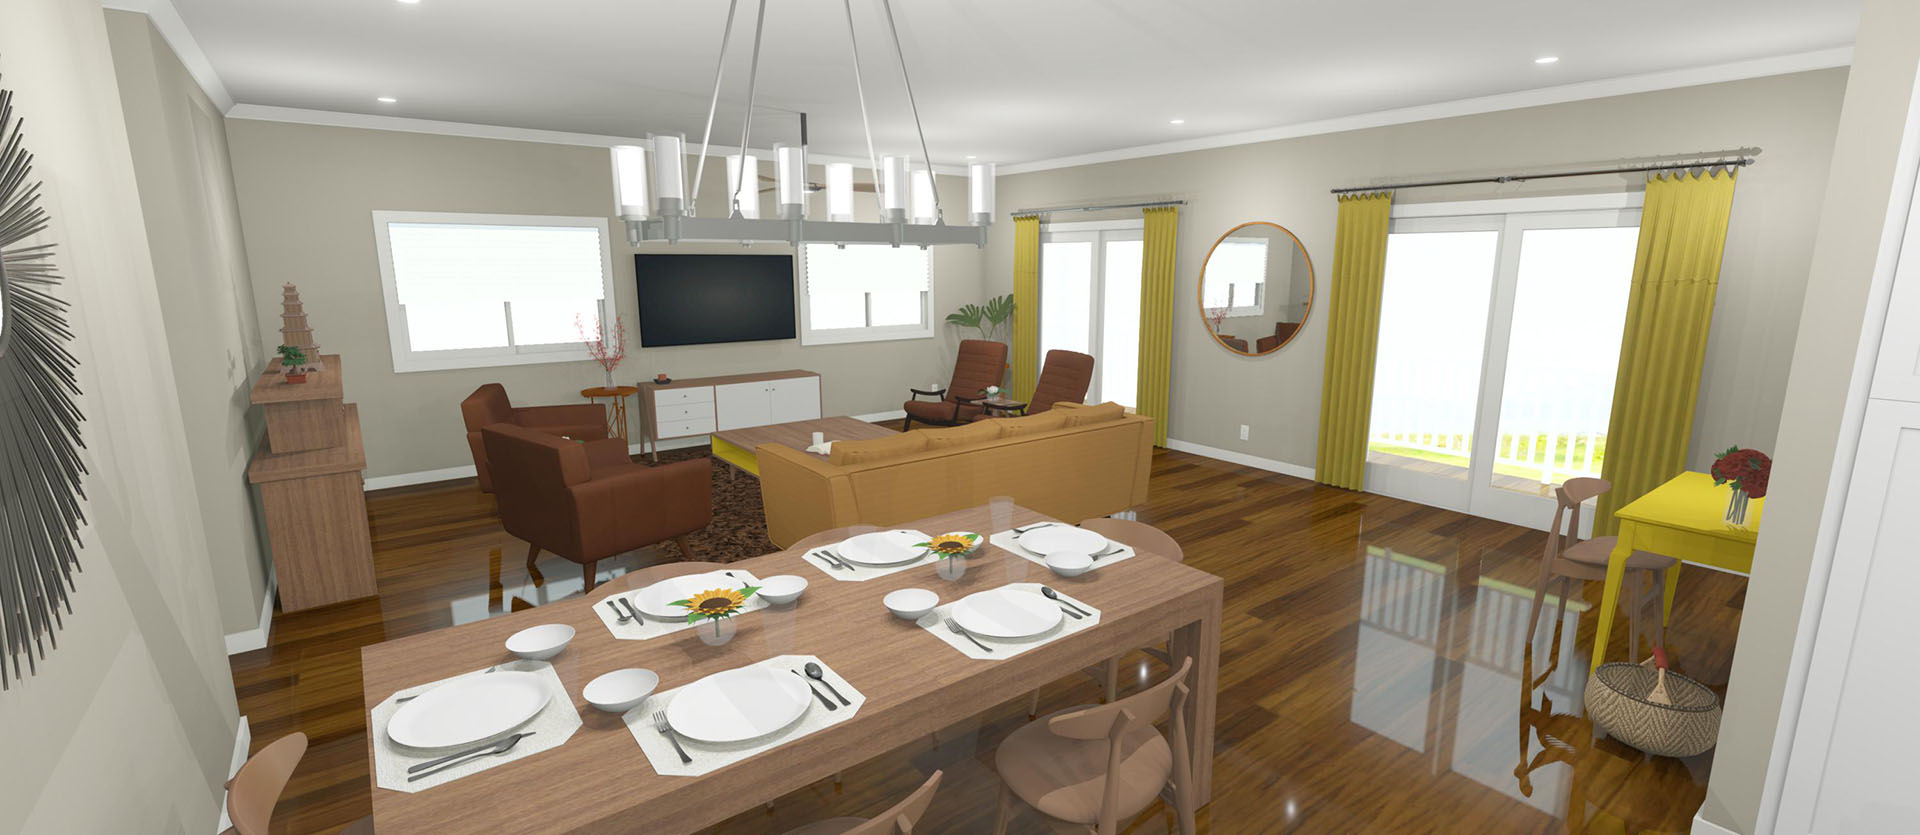 Nohona interior dining and living